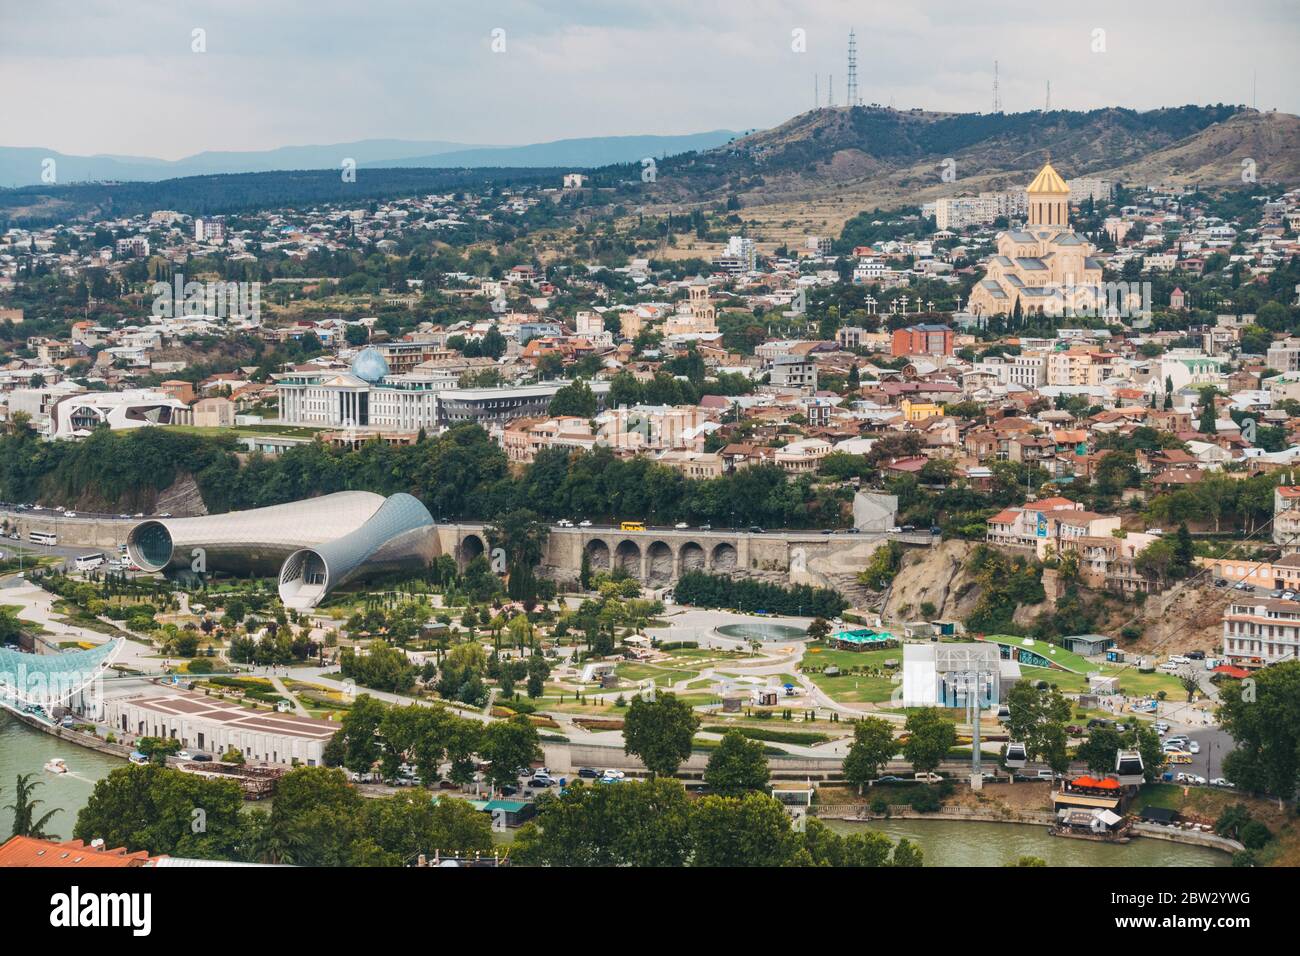 Looking out over the city of Tbilisi, Georgia from the Botanical Garden on the hilltop. The cylindrical metal structure is Tbilisi Music Theater Stock Photo